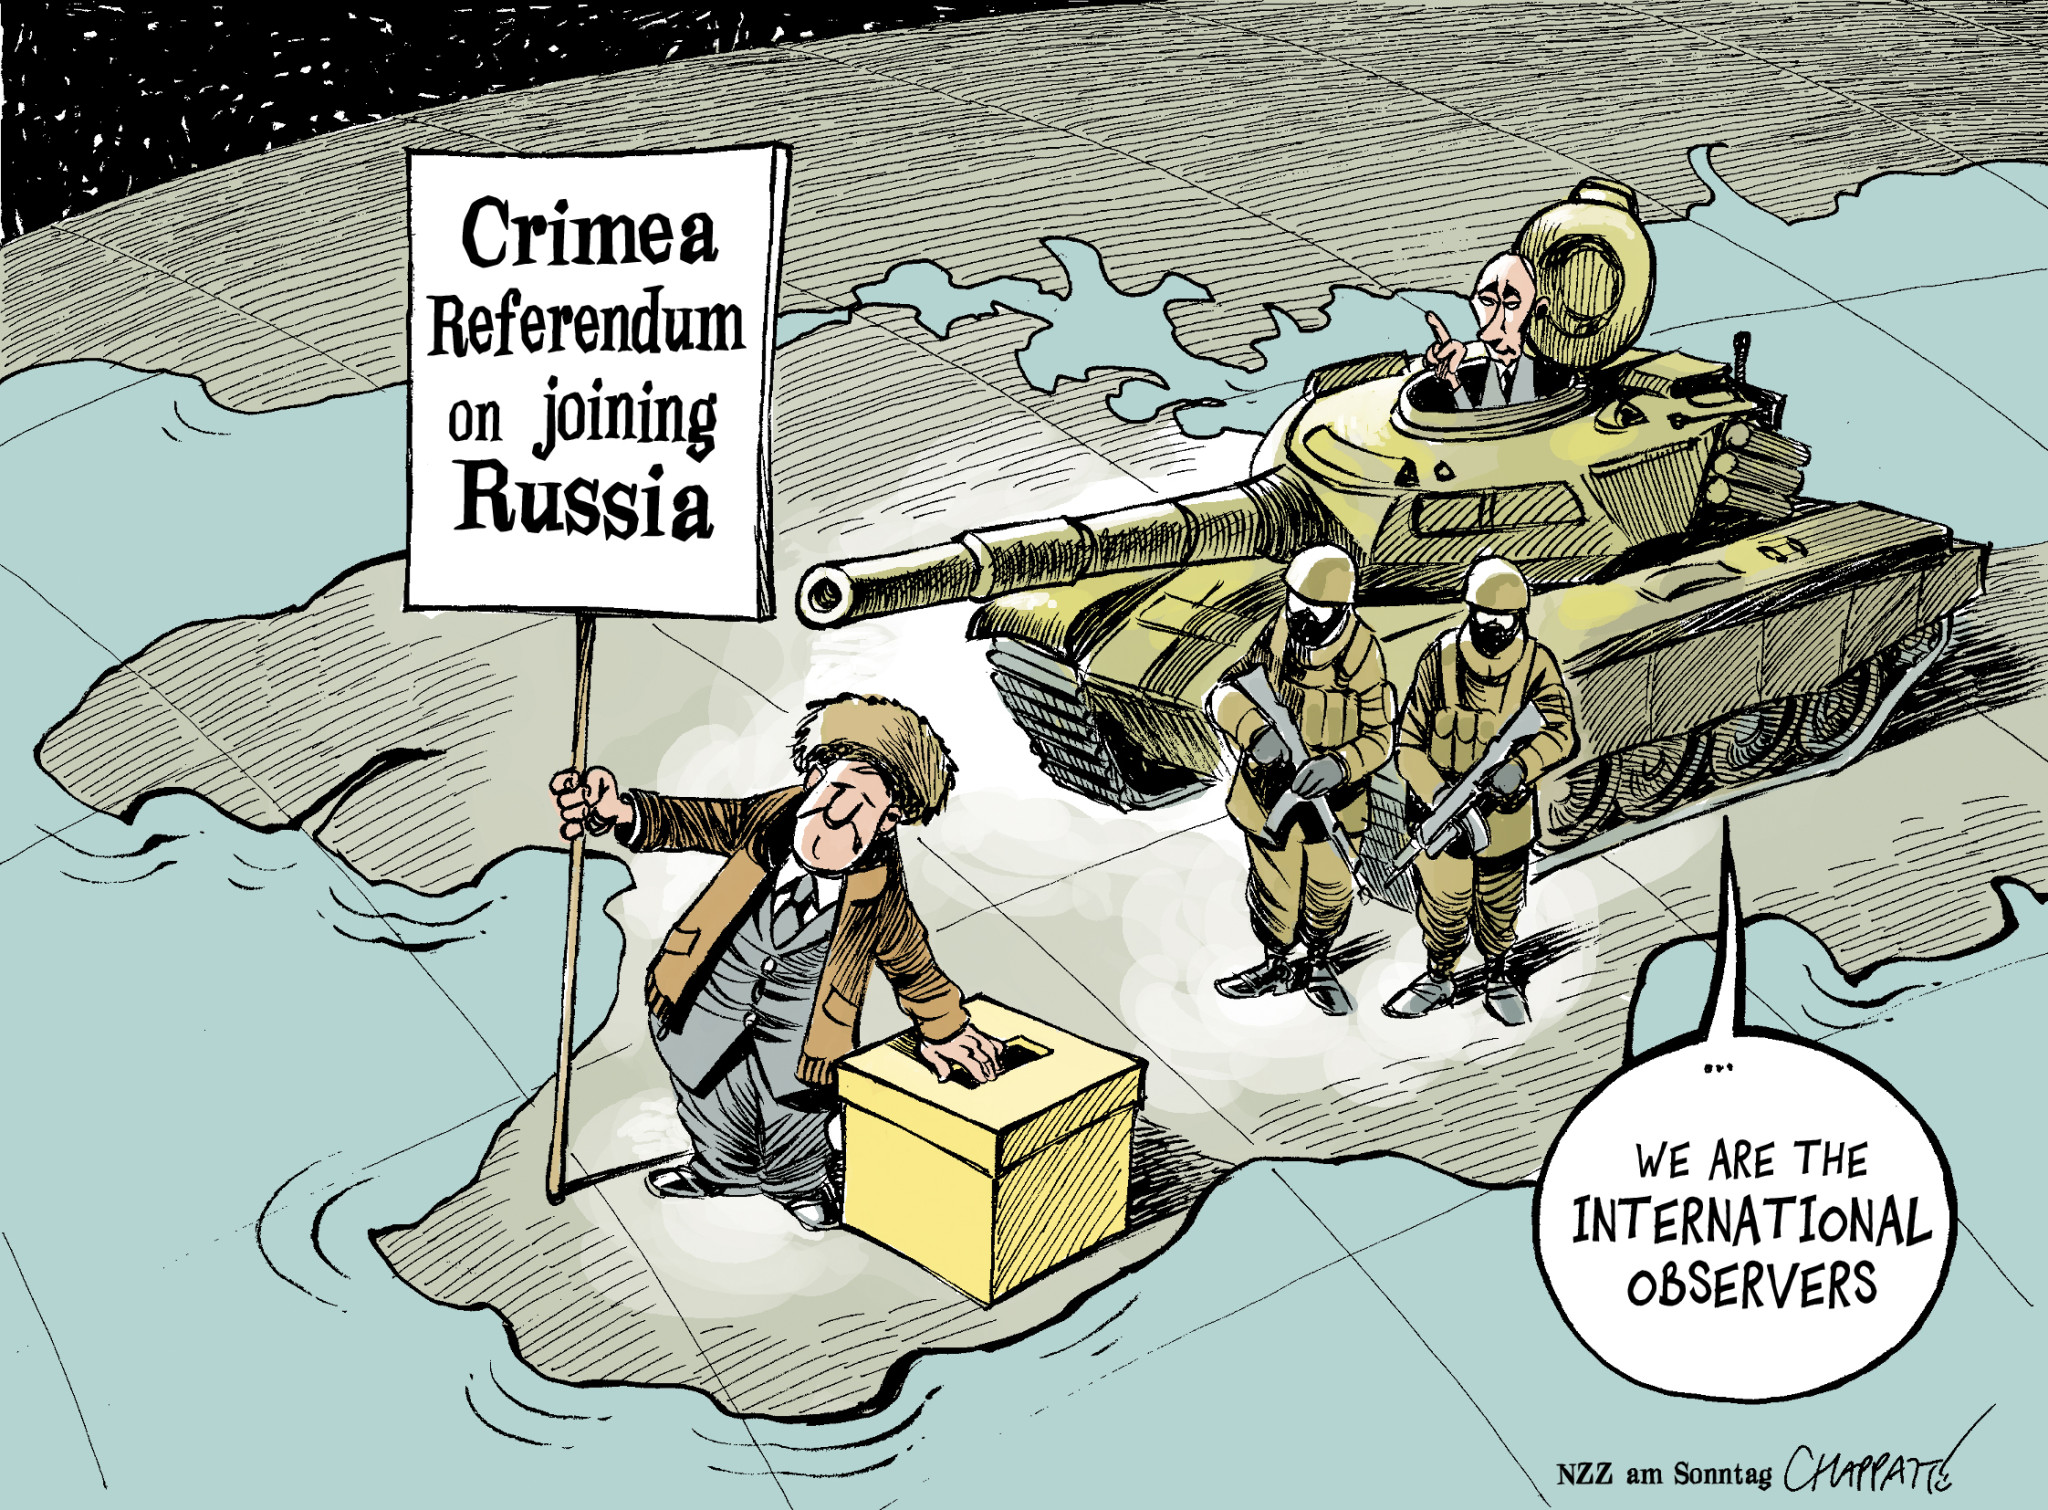 Political cartoon: 2014 Crimean referendum on joining Russia. "We are the international observers."